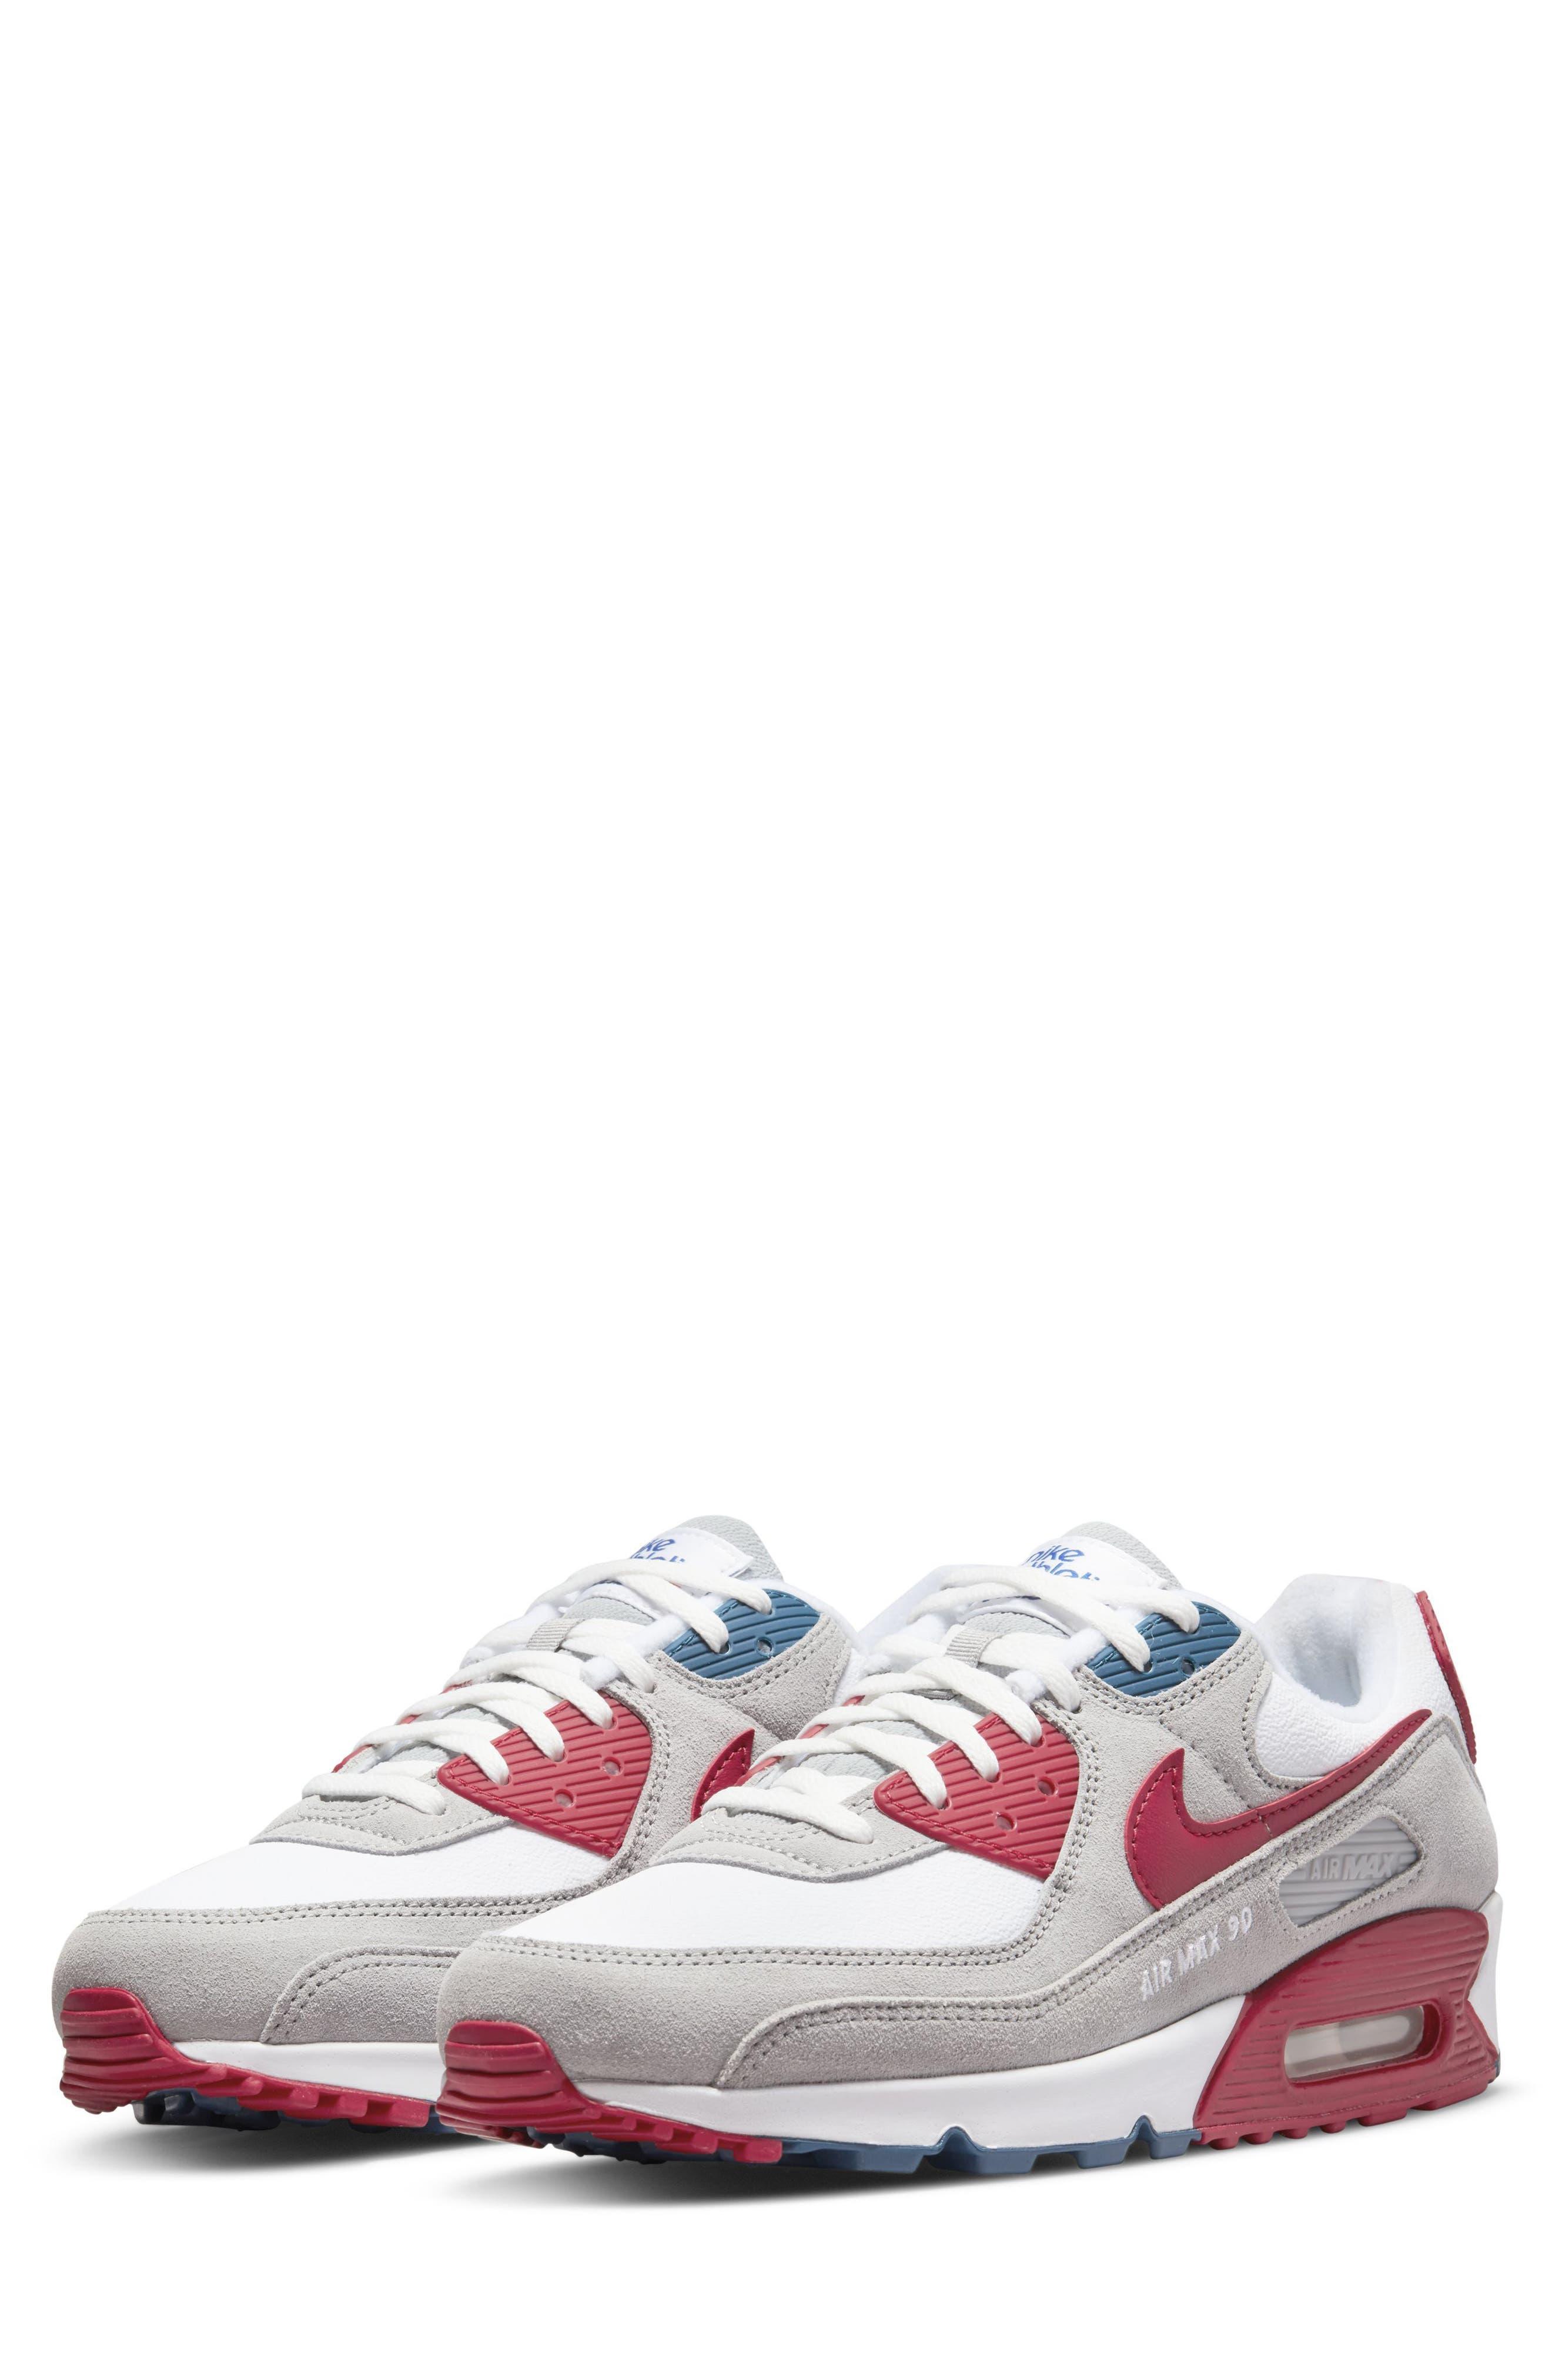 Nike Air Max 90 Sneaker In Grey/gym Red/white/marina At Nordstrom Rack for  Men | Lyst